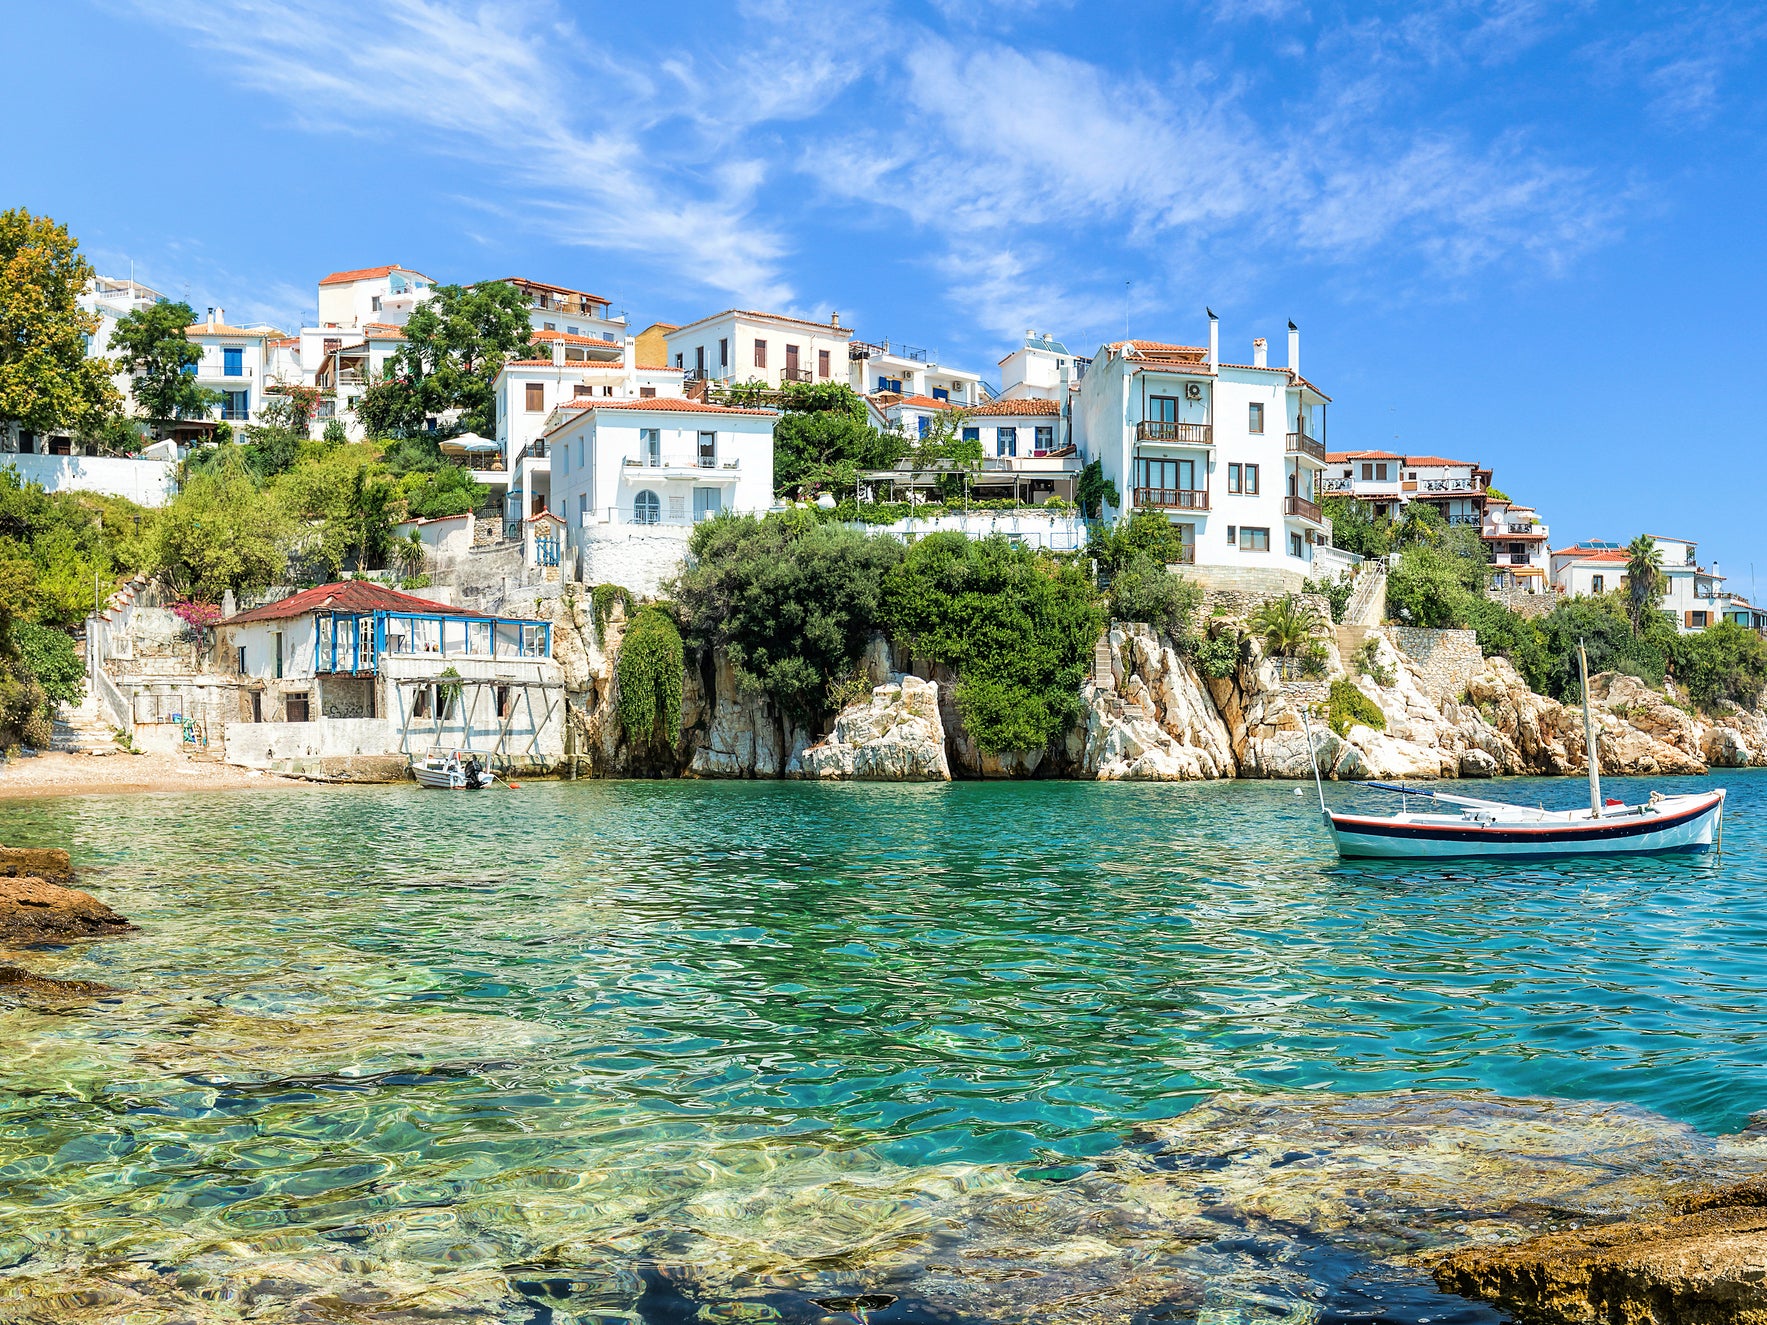 The Greek islands are at their best in September – it would be a shame to miss out